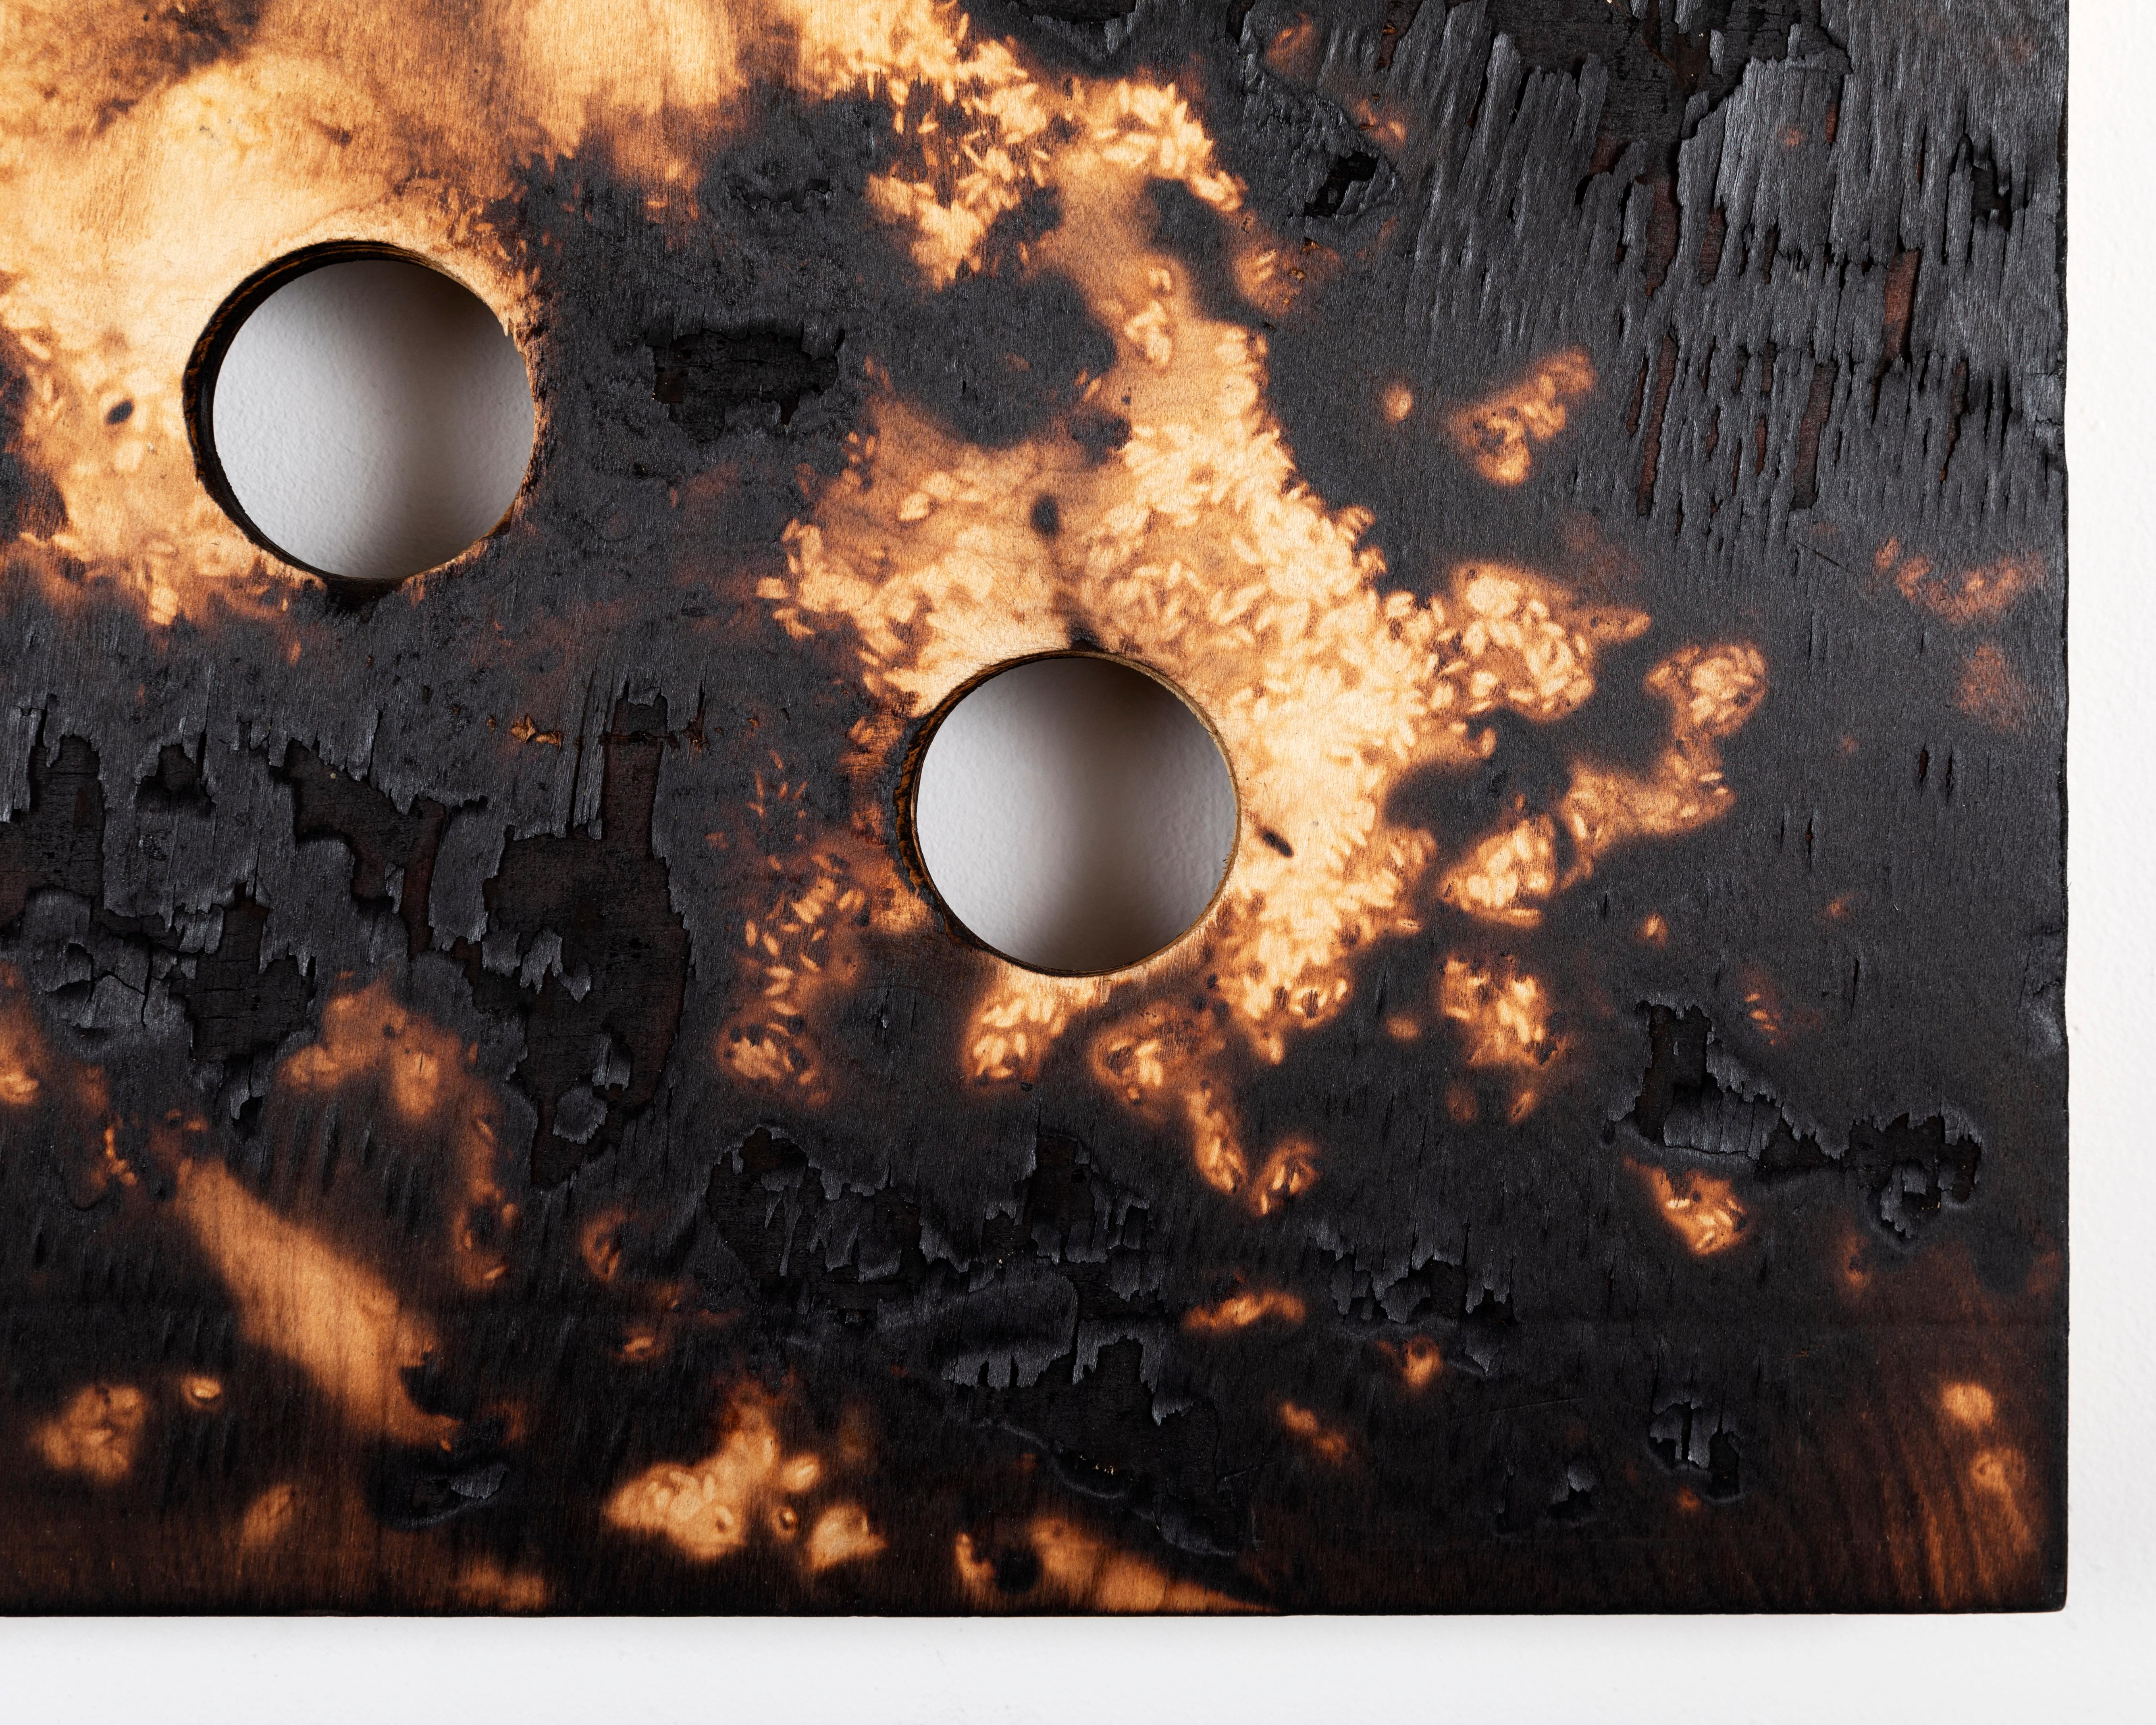 Pyre I, charred birch plywood abstract patterns earth tones created with fire - Abstract Painting by Michael Watson